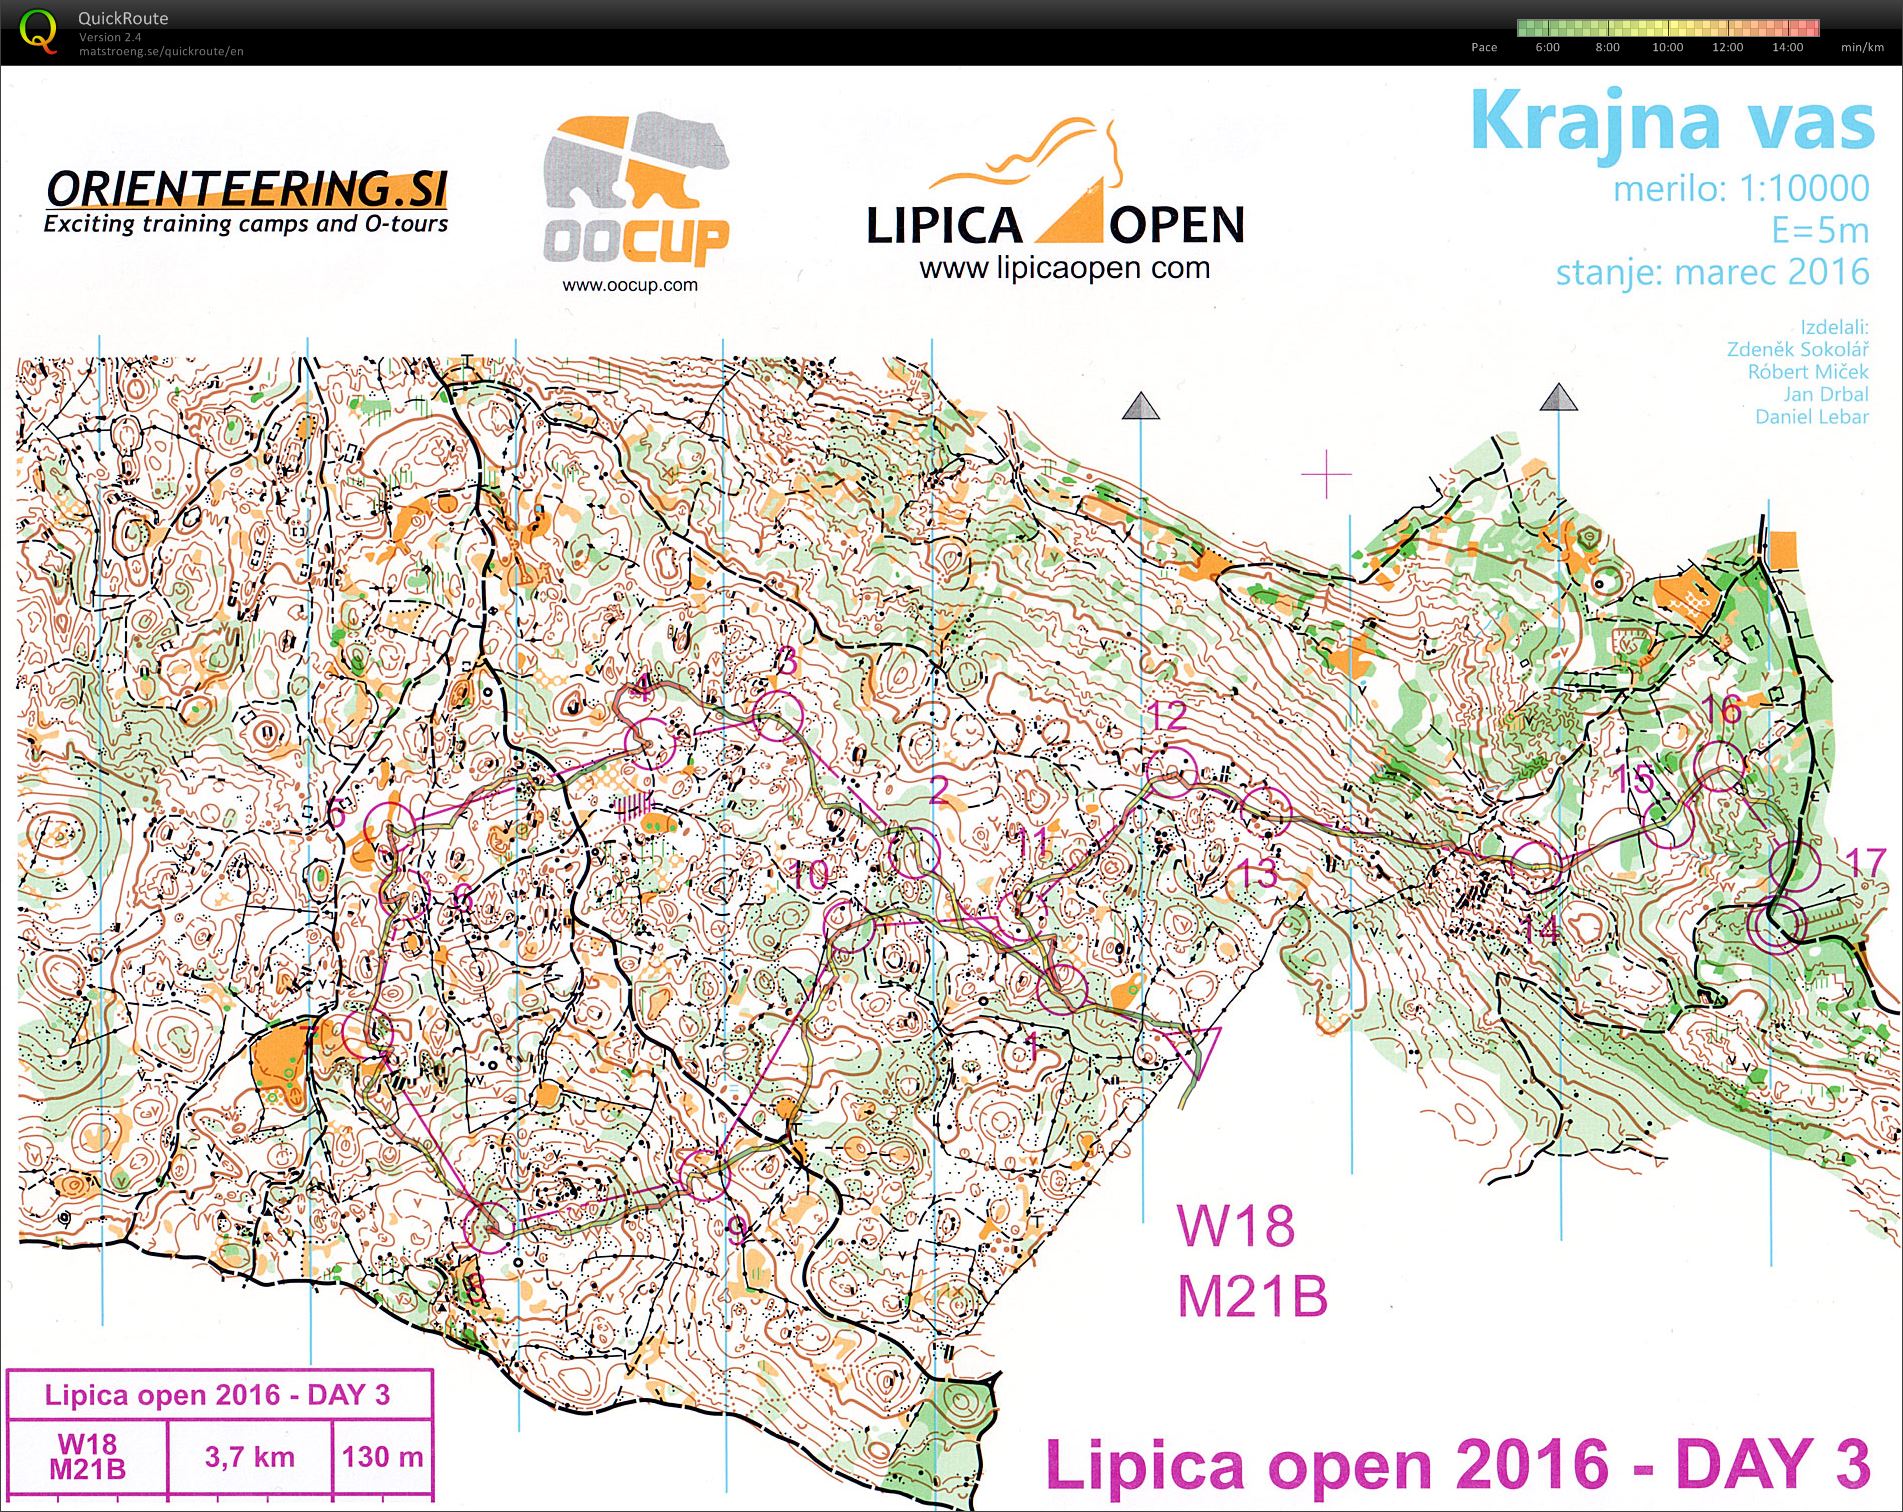 Lipica Open 2016 Day 3 (14/03/2016)